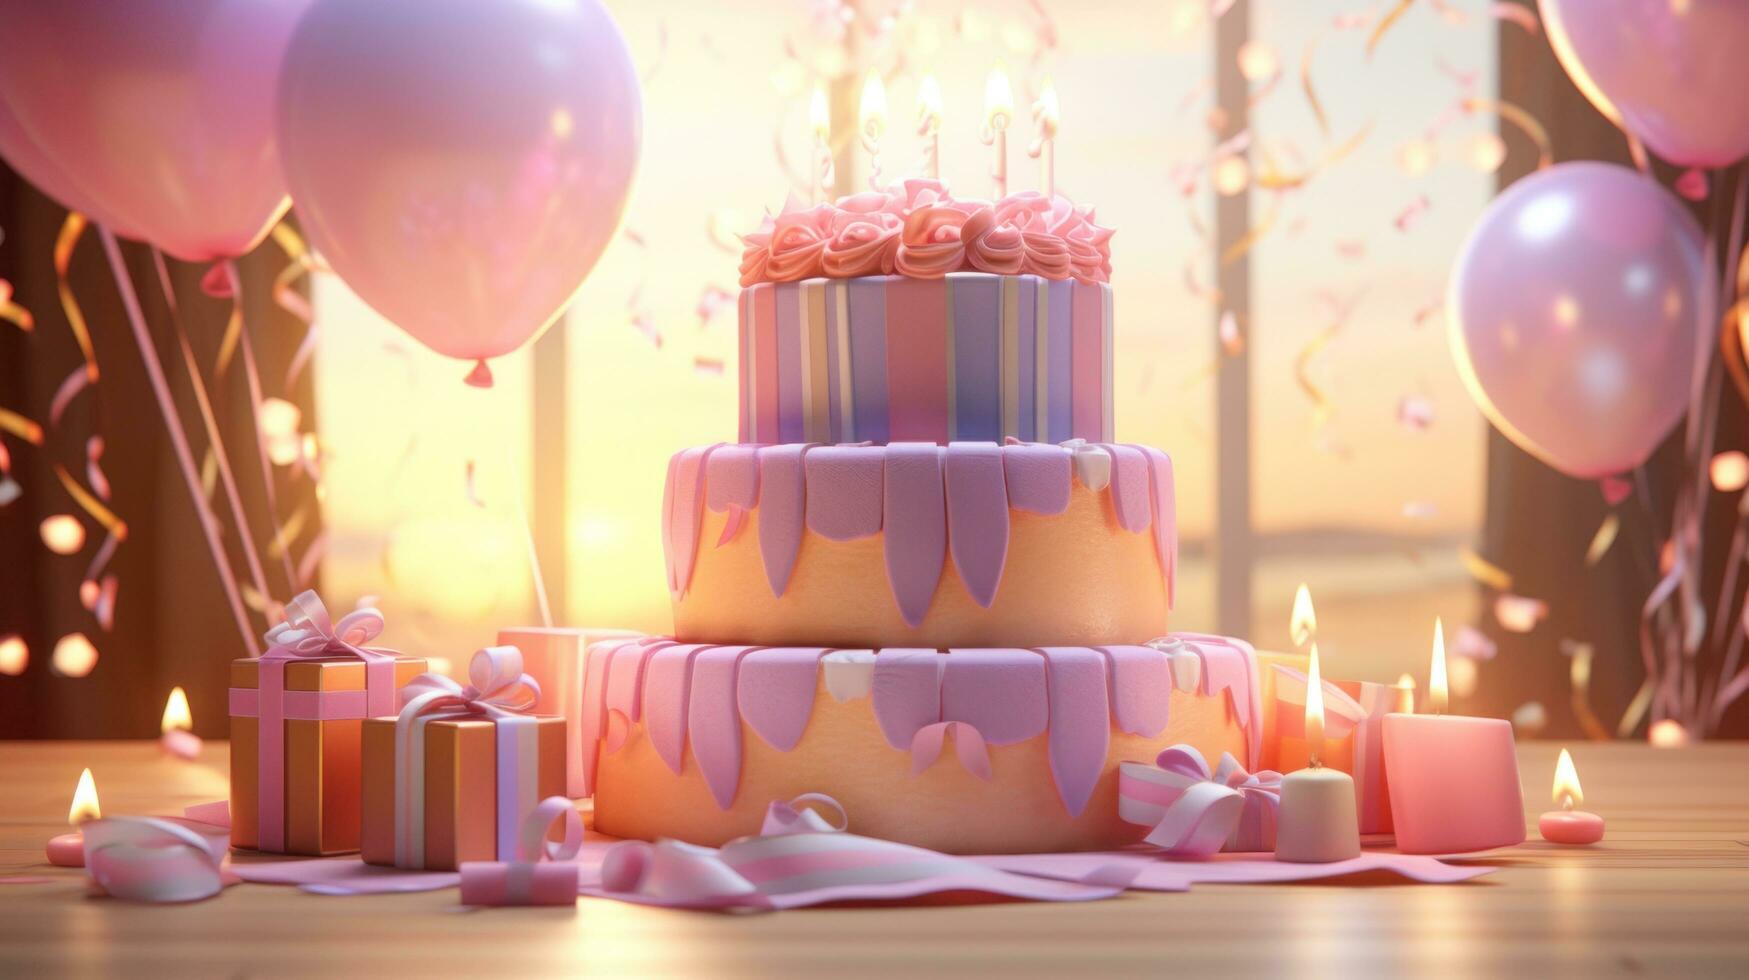 AI generated a birthday cake is displayed with lit candles on top photo